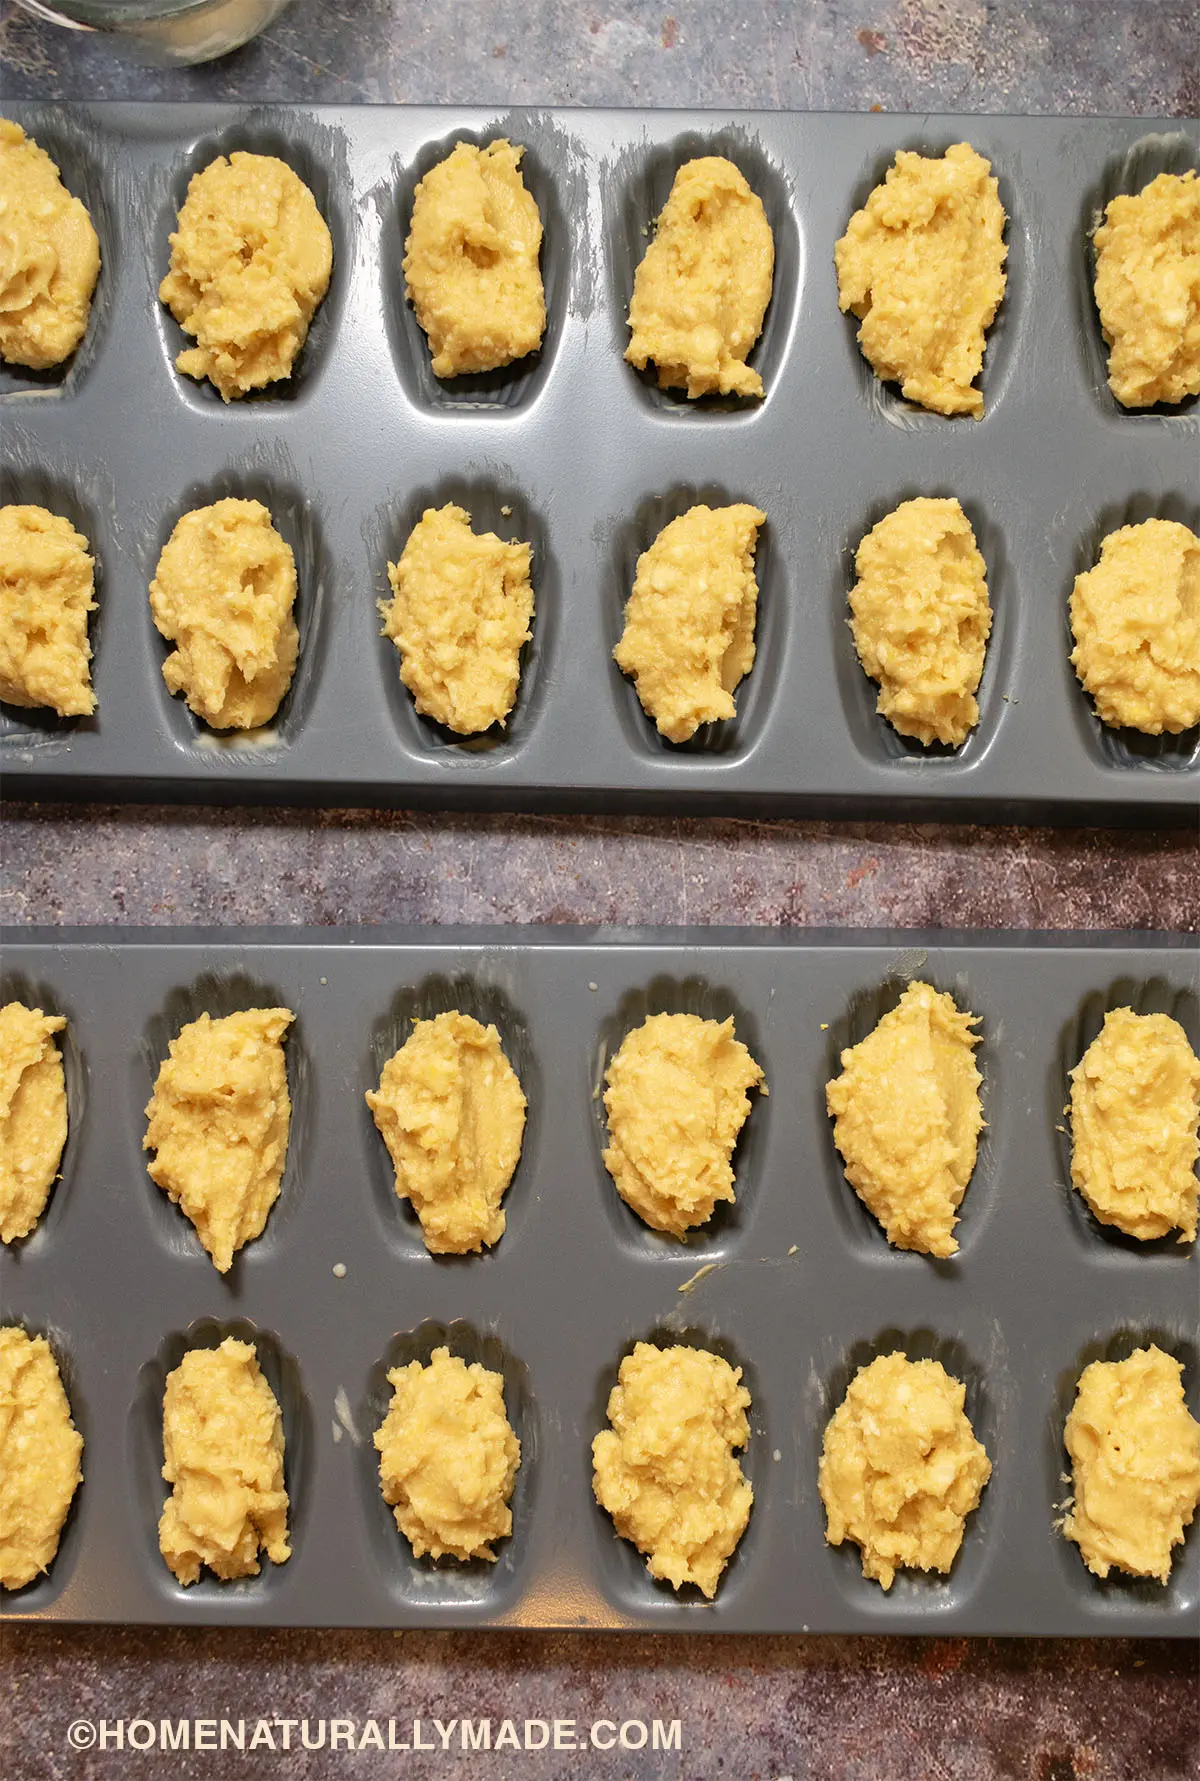 add homemade Madeleine batter to the baking pan